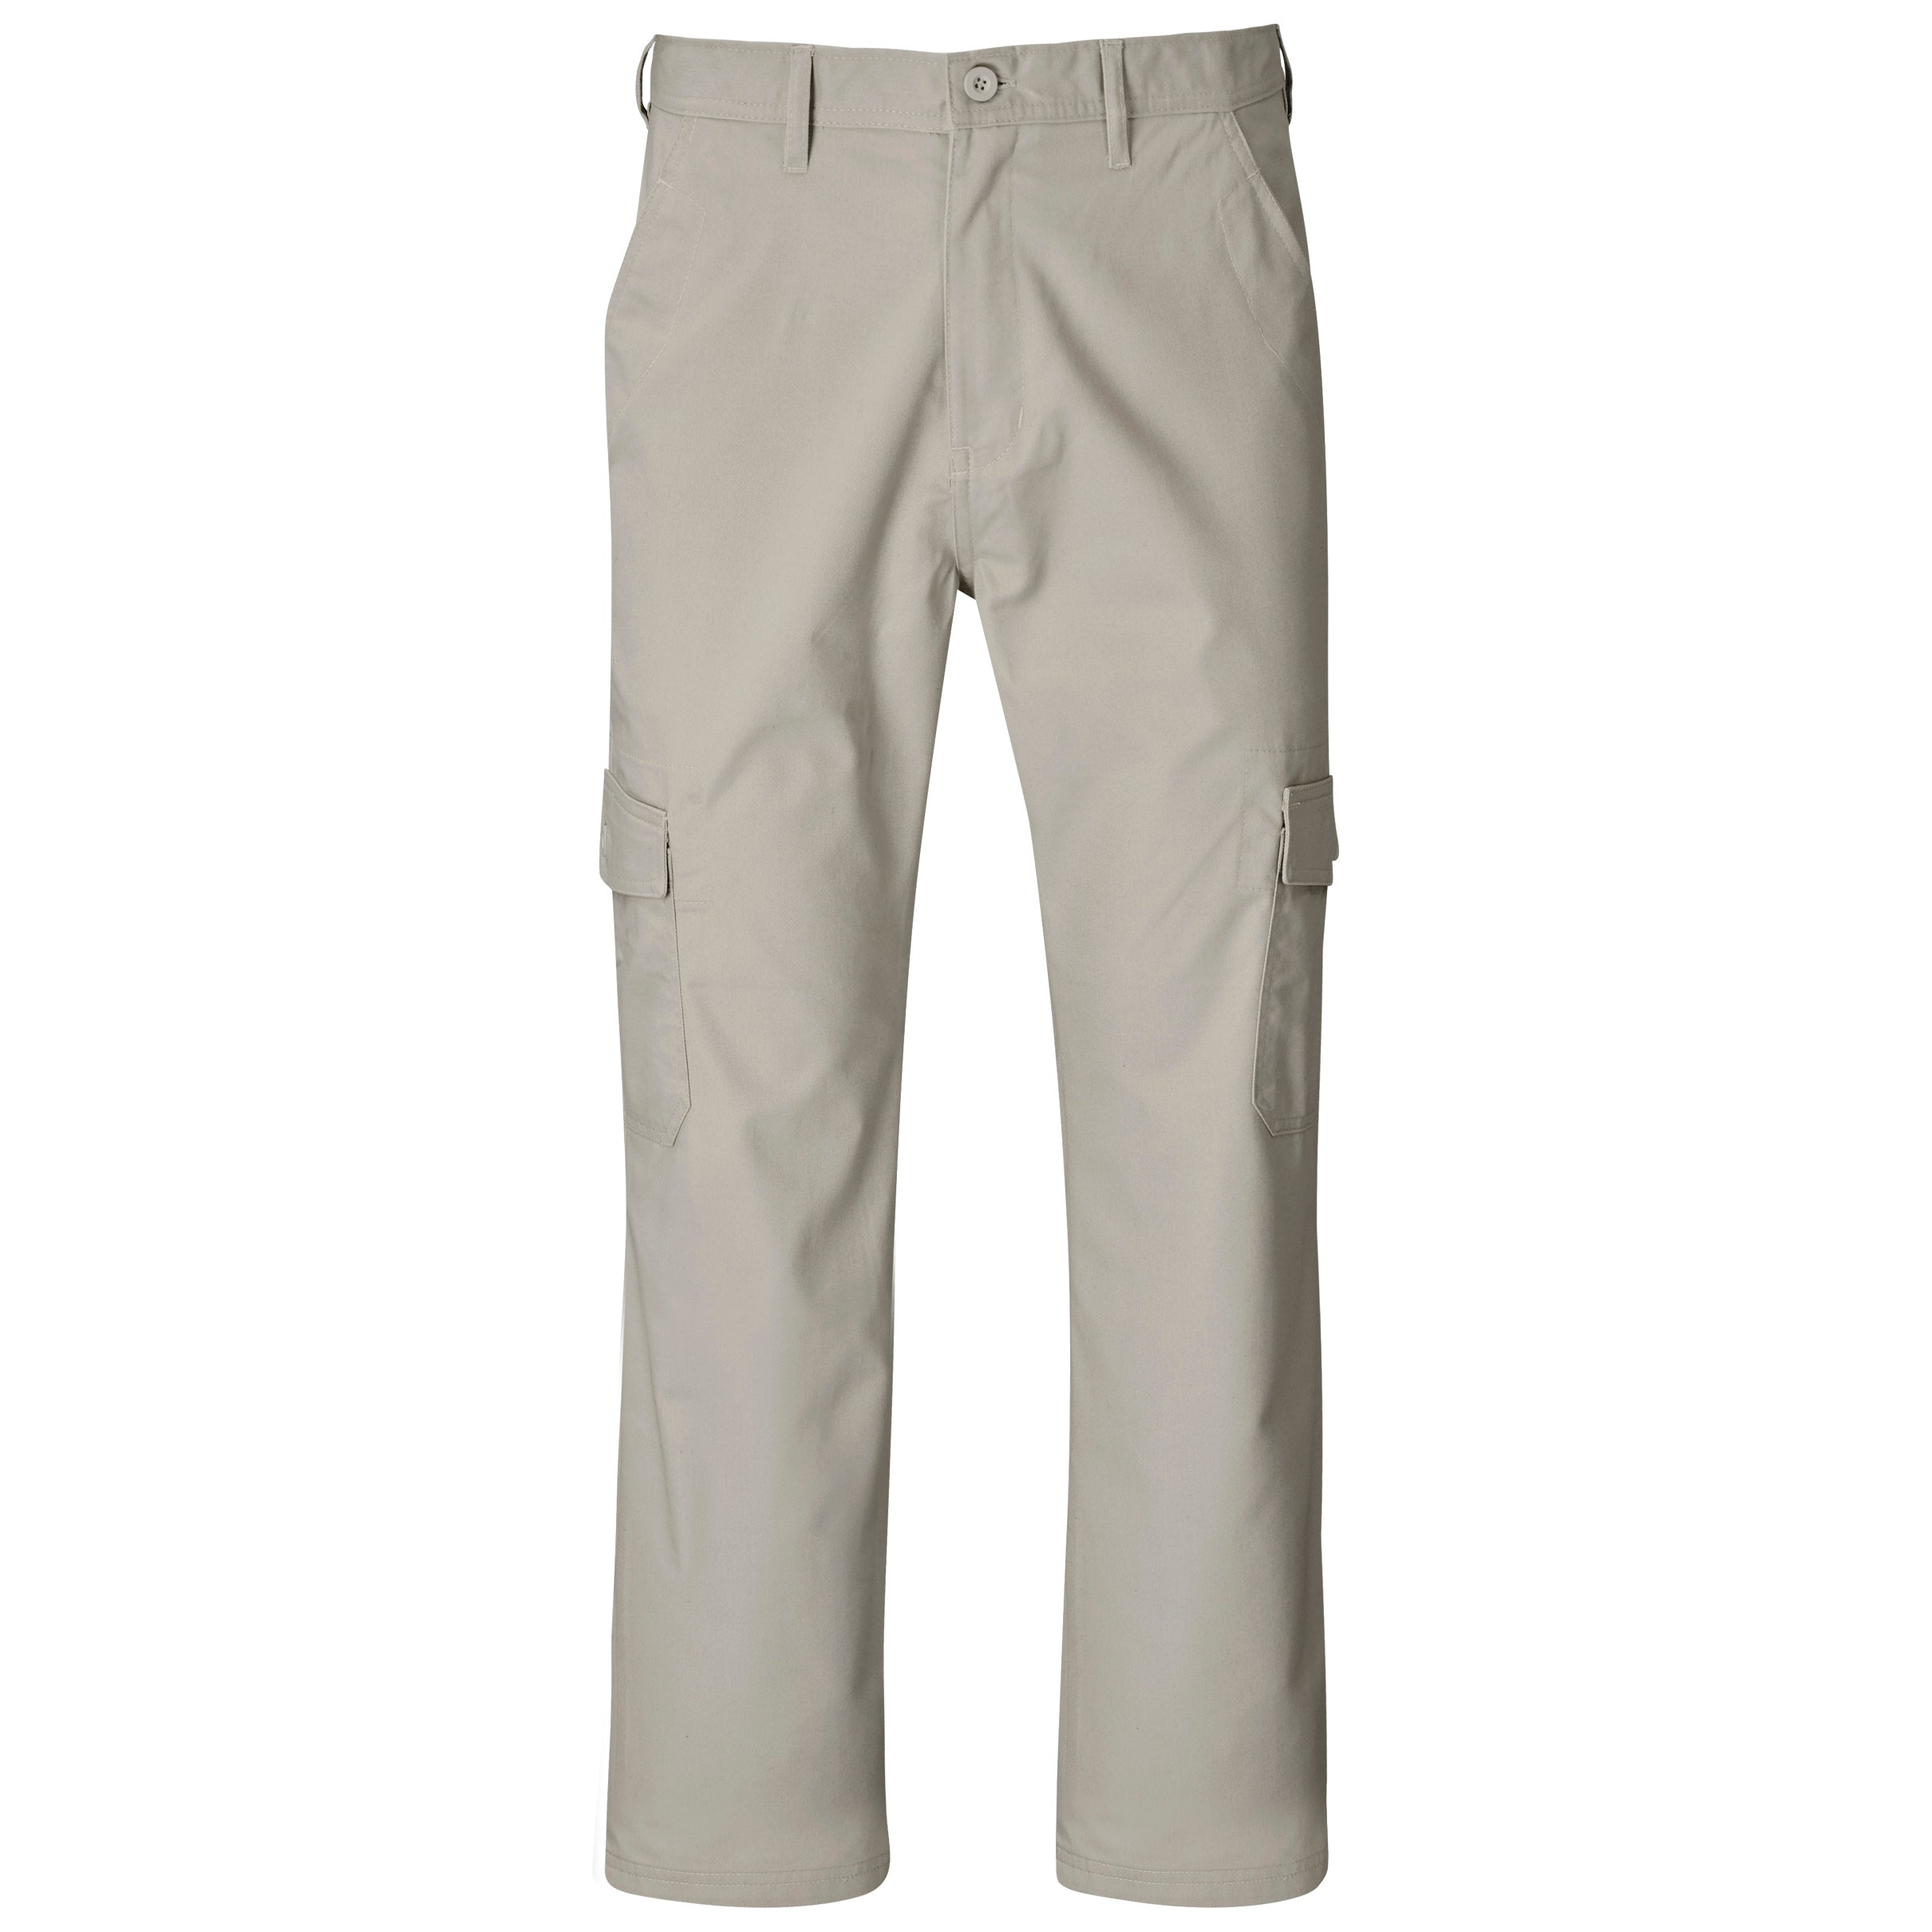 Military Style Cargo Pants For Men Branded Sports Linen Cargo Trousers  211112 From Dou05, $17.38 | DHgate.Com